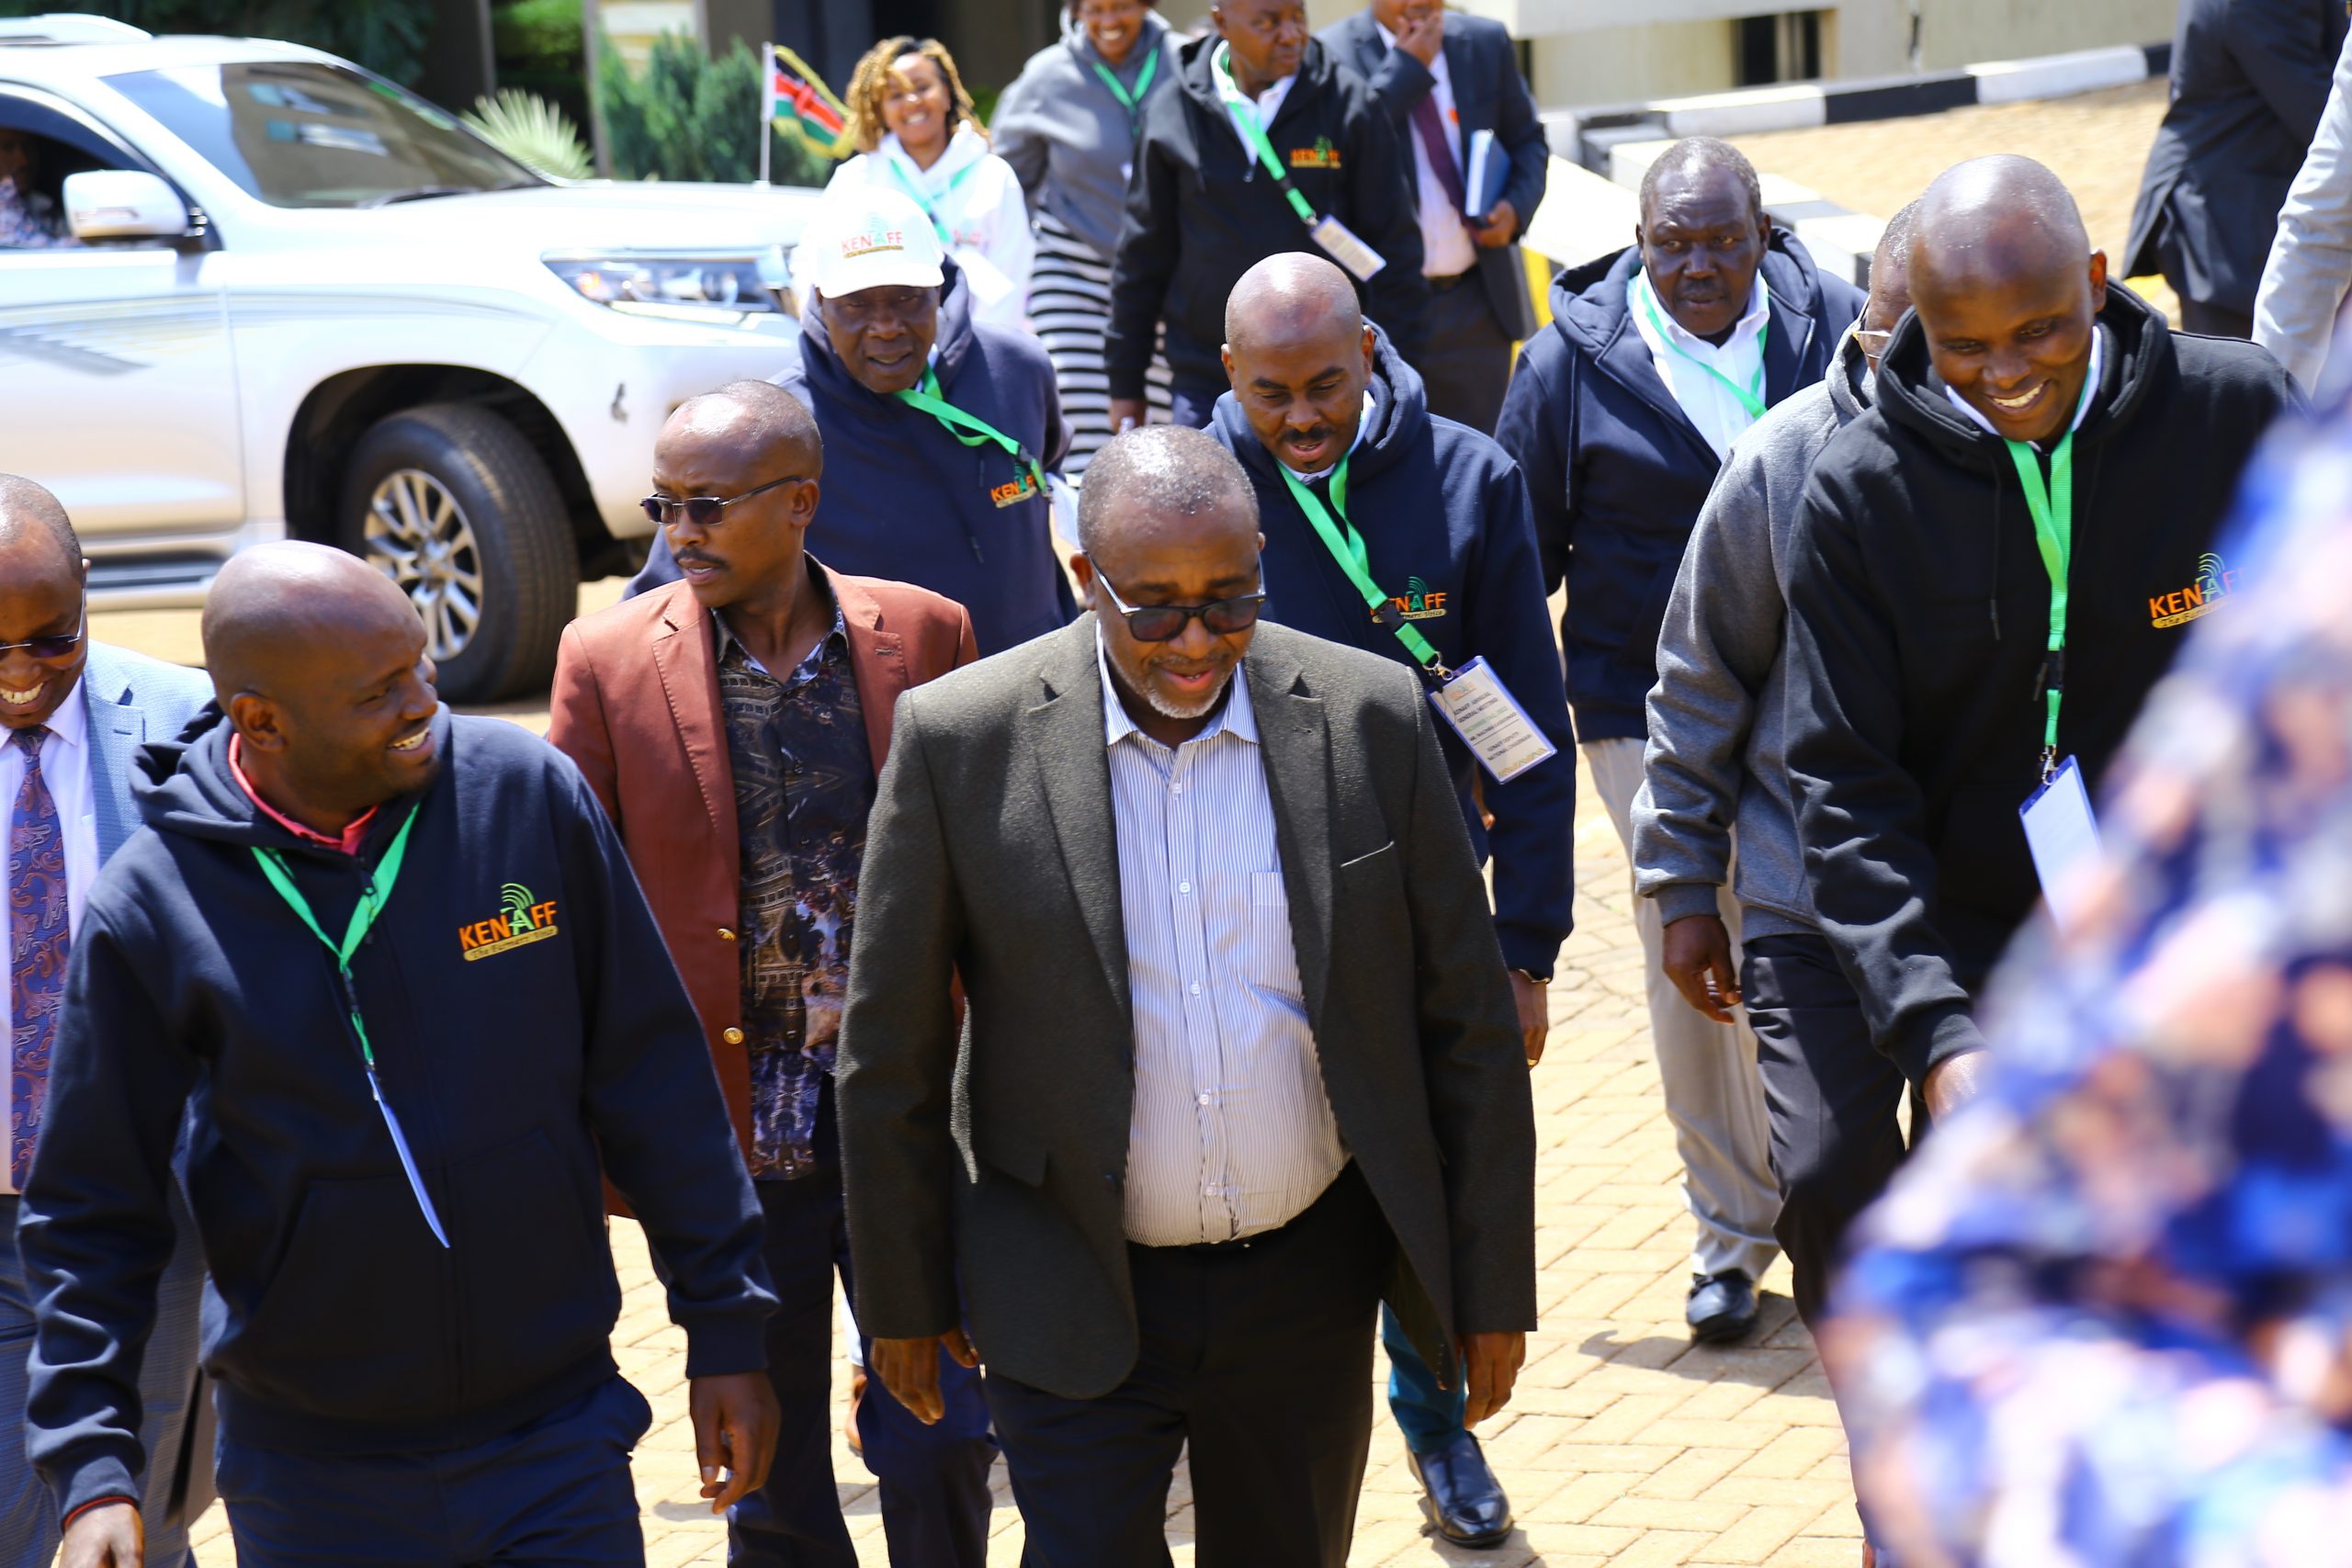 Hon. Mithika Linturi, Cabinet Secretary, Ministry of Agriculture & Livestock Development, is arriving at the FCC for the 76th AGM on December 2, 2022.